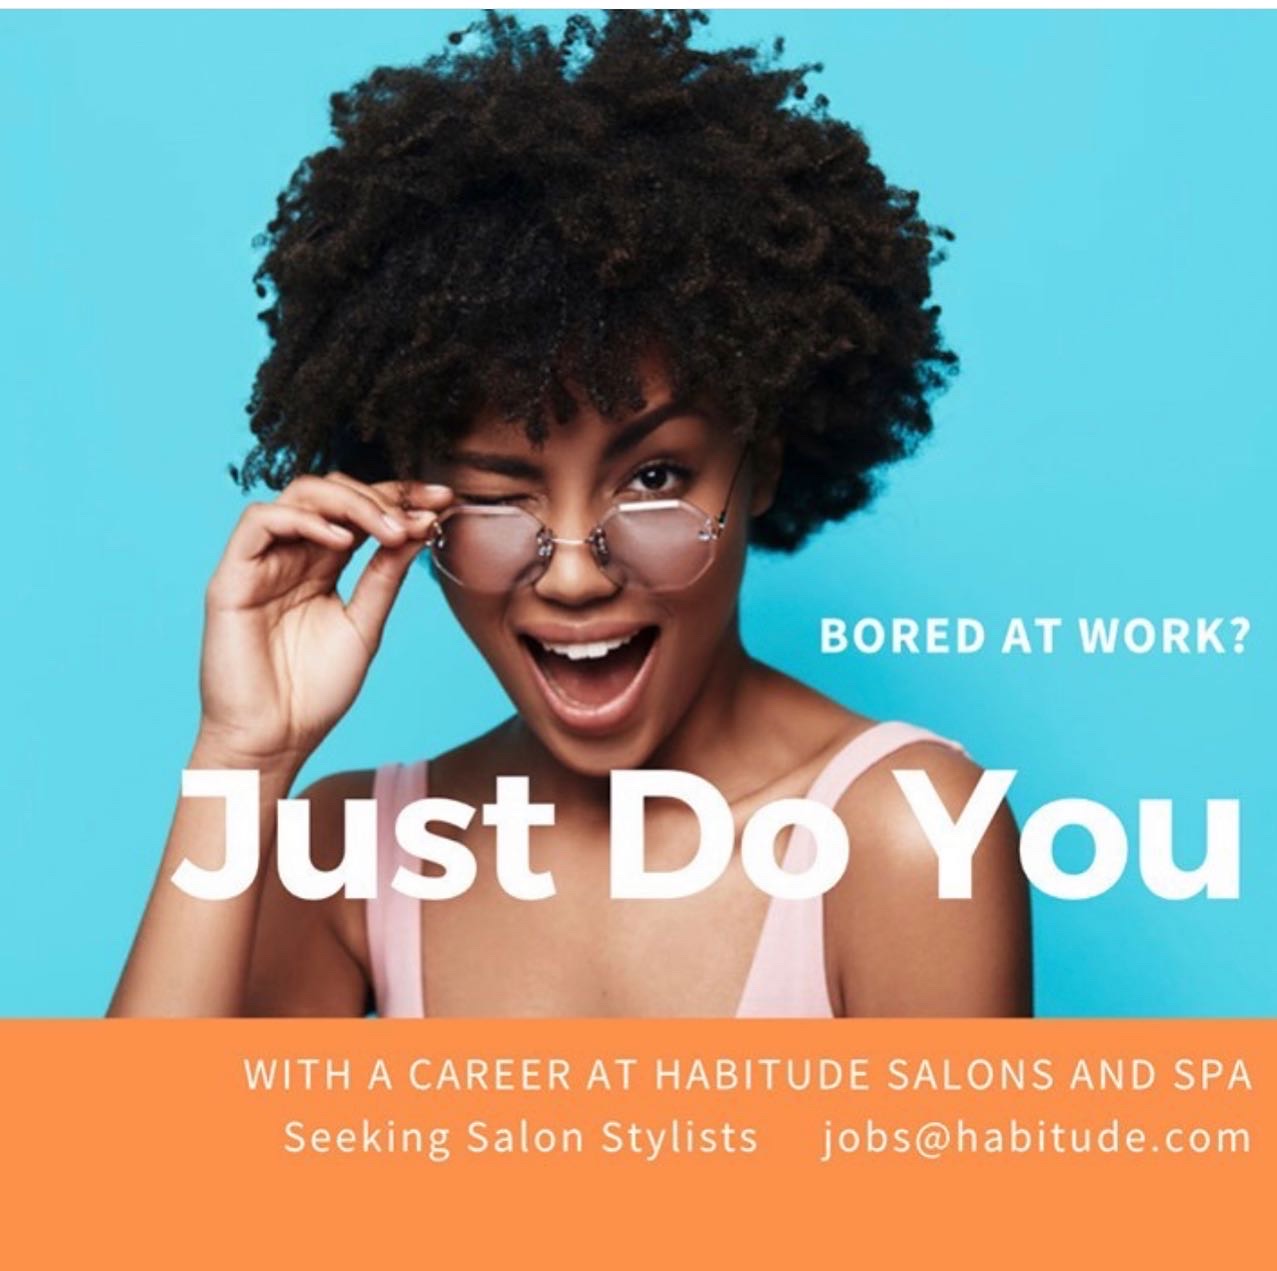 Just do you - careers at Habitude